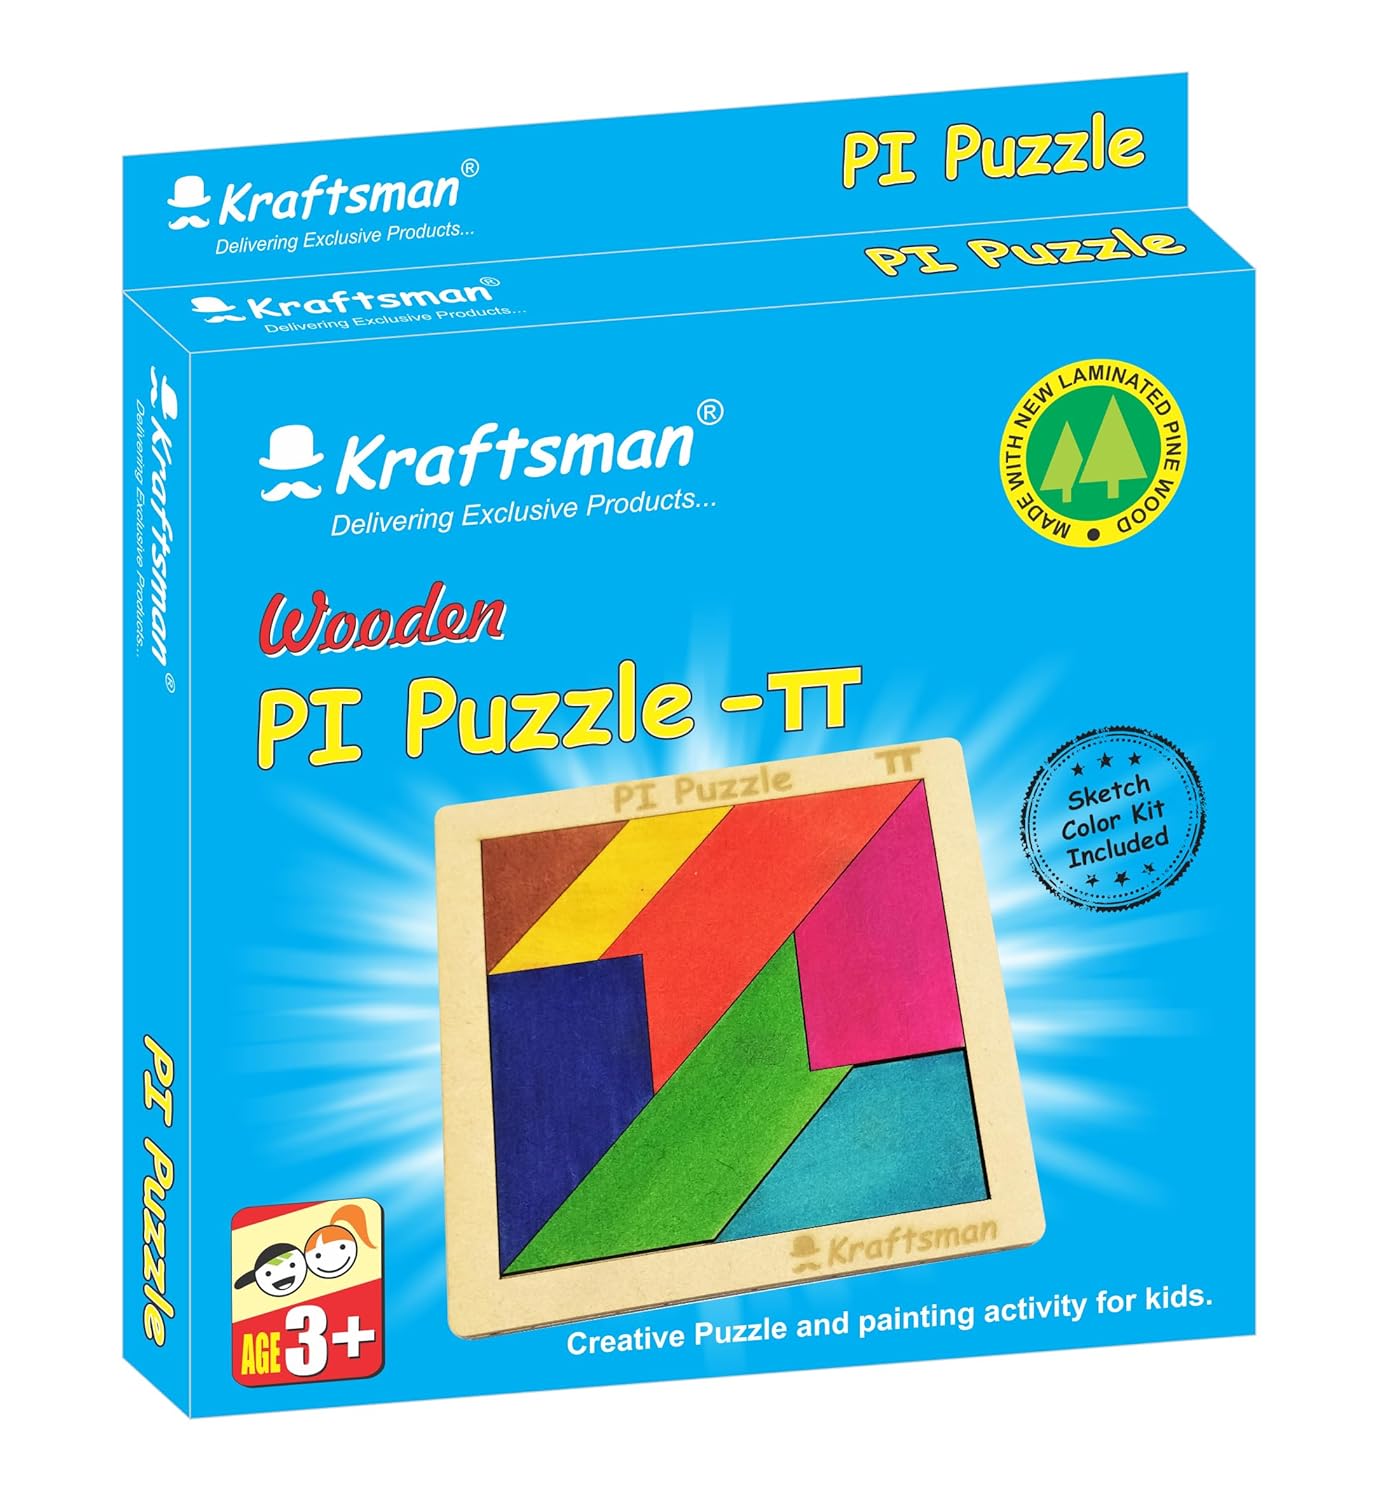 Kraftsman Color Your Puzzle Travel Games for 4+ Kids Fun Learning Educational Board Game (PI Puzzle)